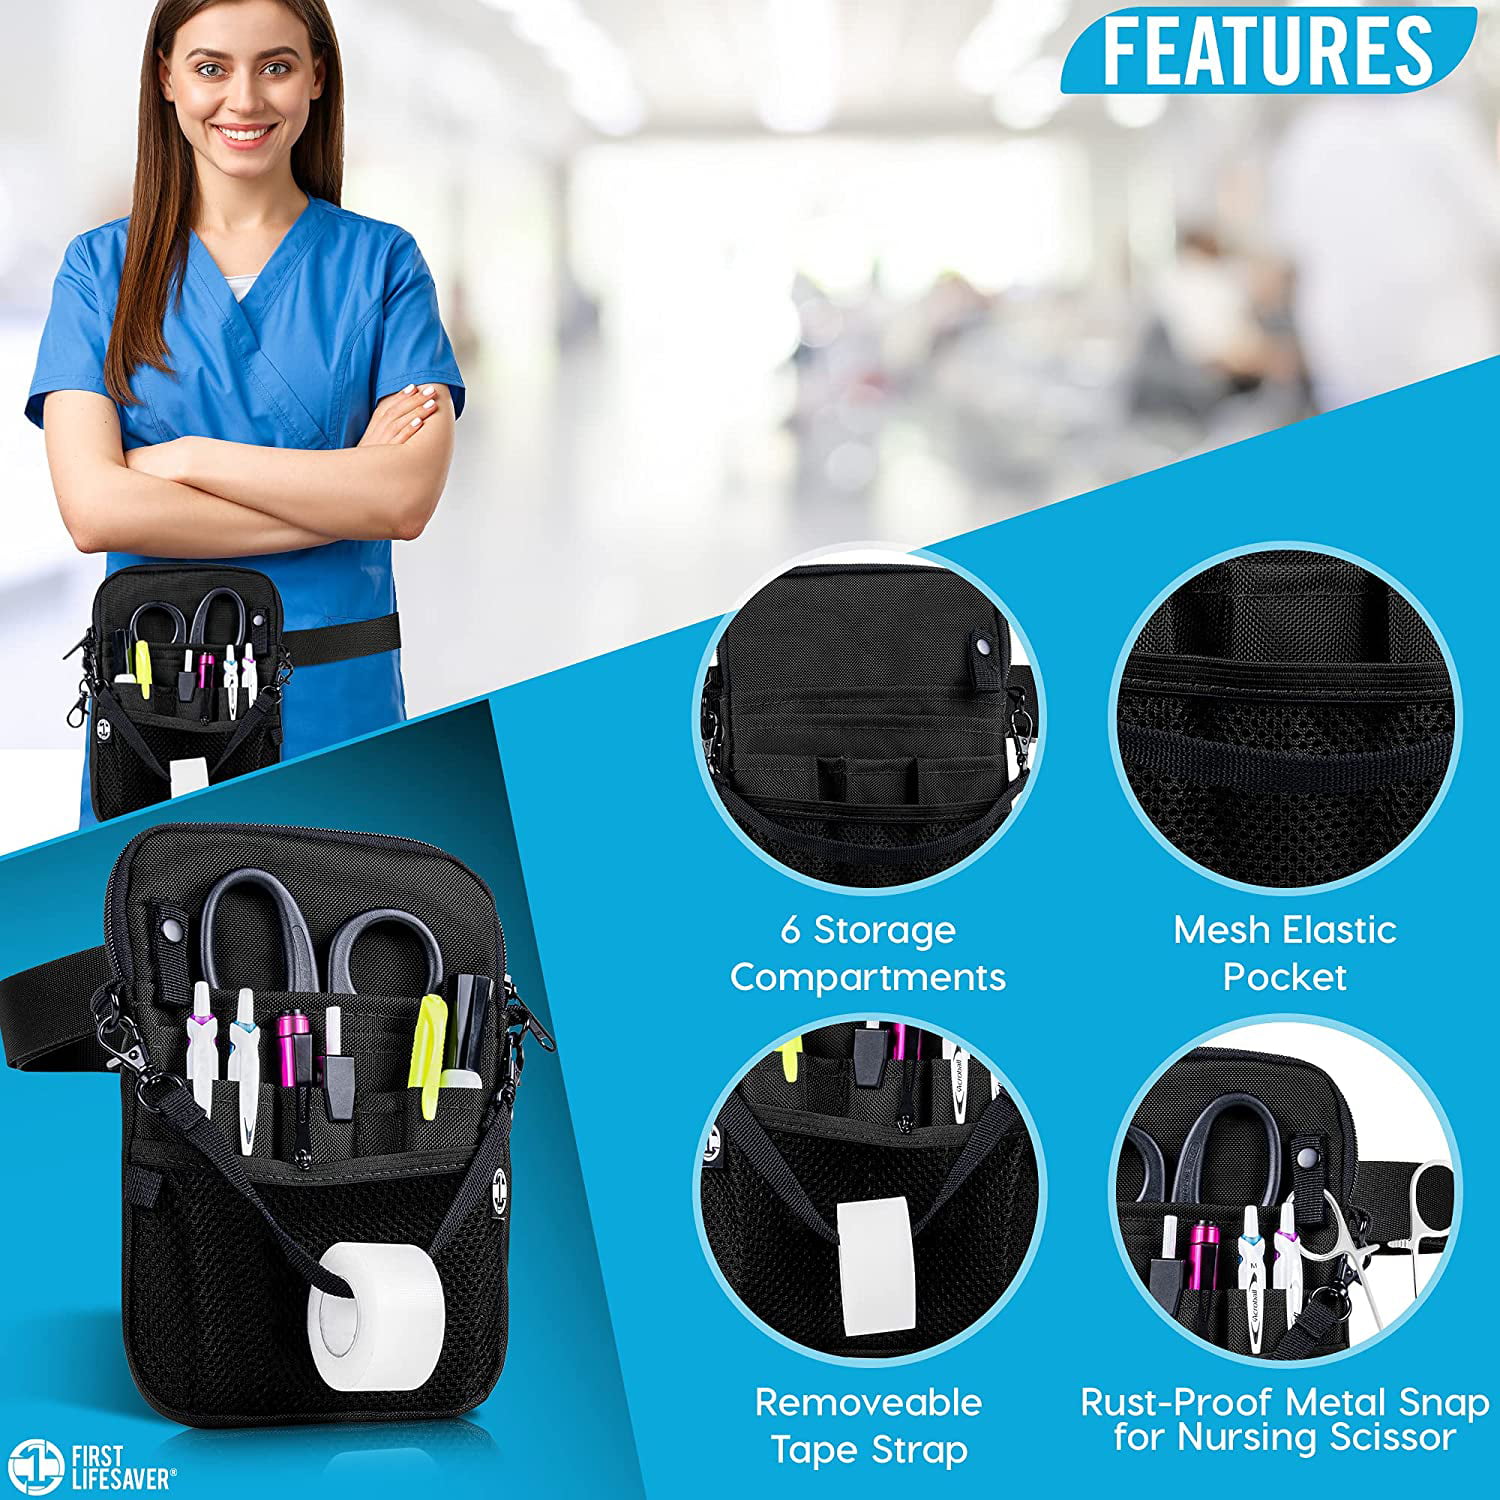 and Emergency Supplies and Utility Storage for Stethoscopes Bandage Scissors Student and Nurse Use First Lifesaver 4-in-1 Nursing Fanny Pack with Medical Gear Pockets Tape Holder 